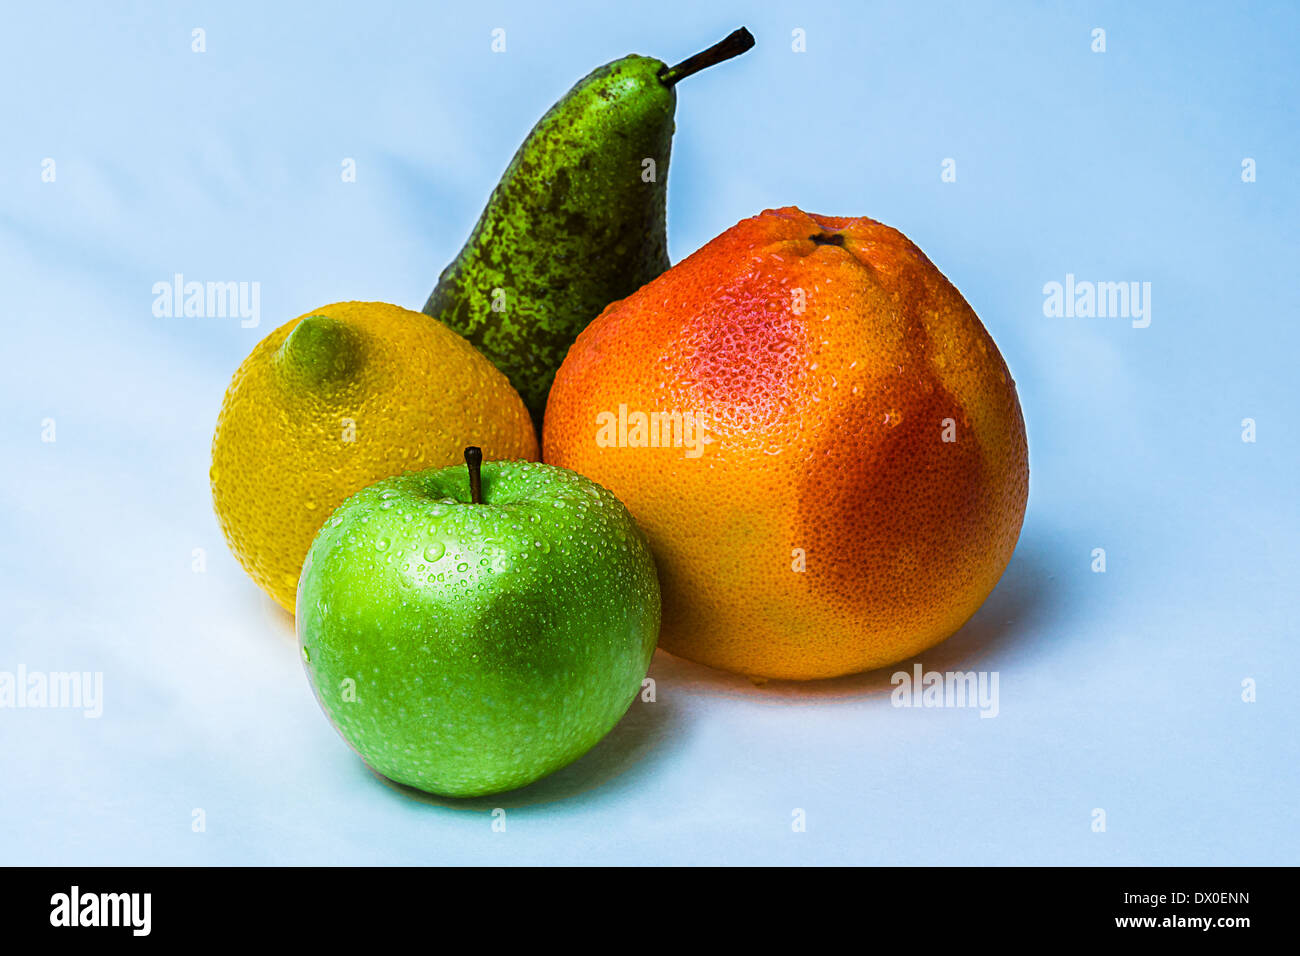 Fruits. Closeup view of colorful fruits: orange grapefruit, green apple, yellow lemon and green and pear against blue background Stock Photo